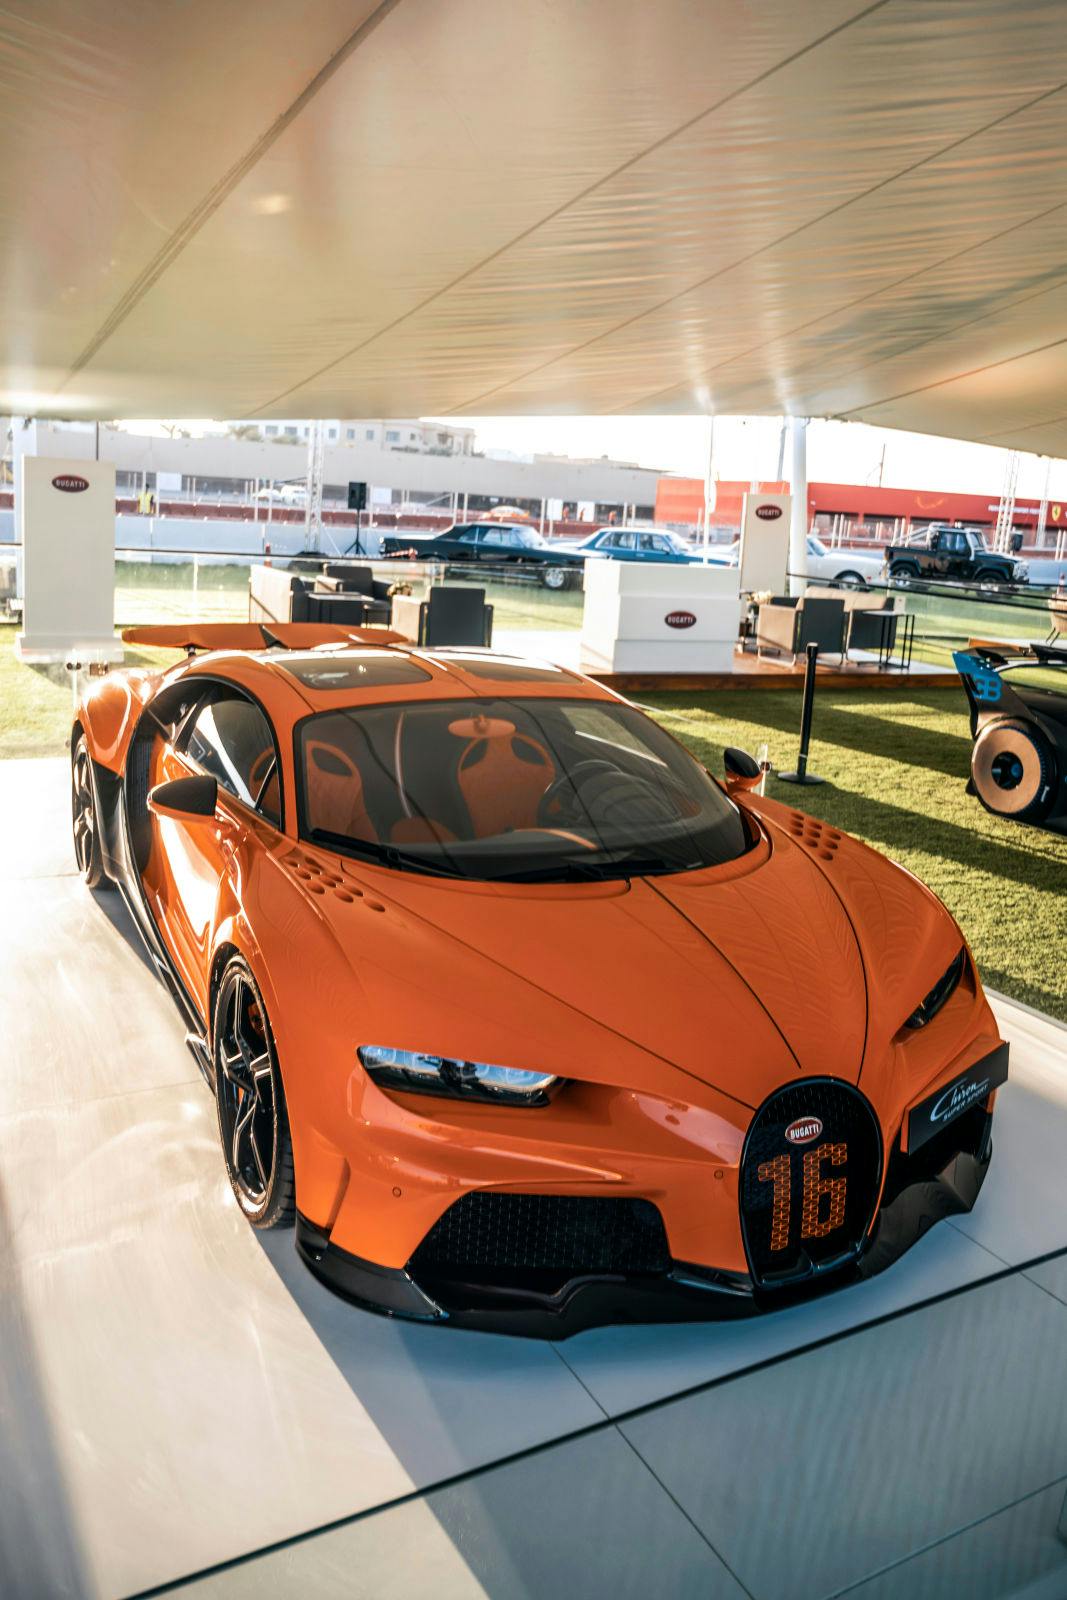 The Chiron Sport, Pur Sport, Super Sport and Bolide stood proud alongside some of the world’s leading brands at the Riyadh Car Show.